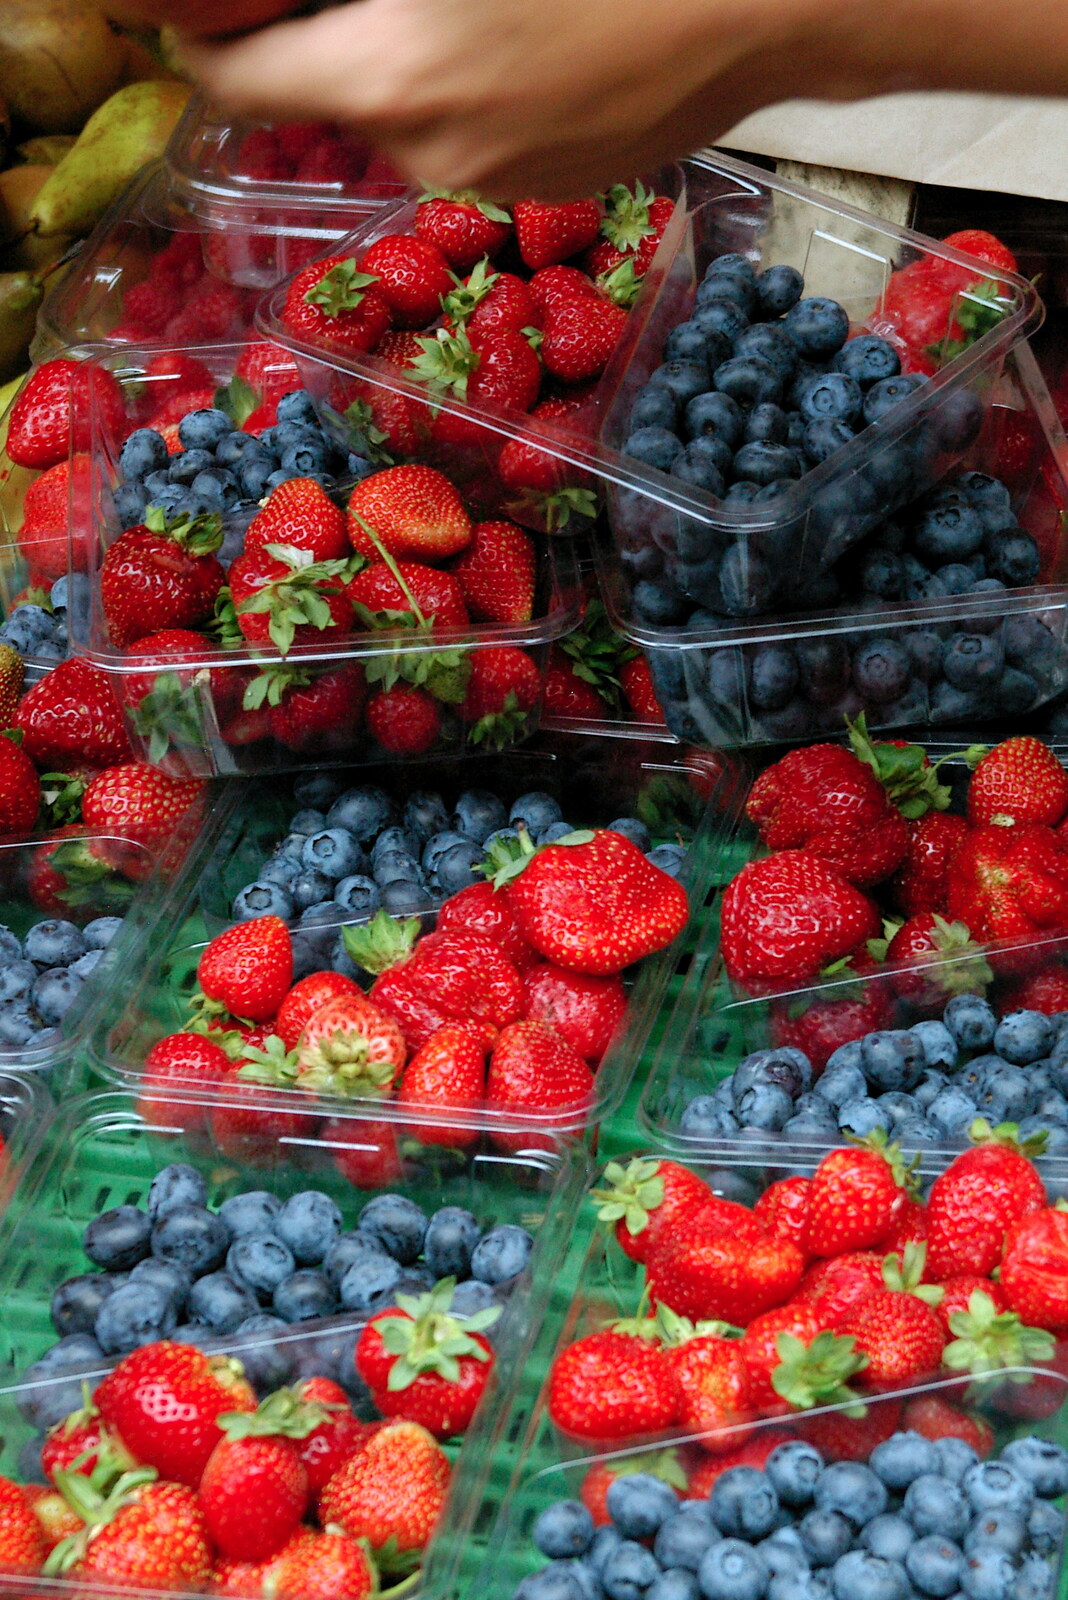 Strawberries and blueberries from Borough Market and North Clapham Tapas, London - 23rd July 2005